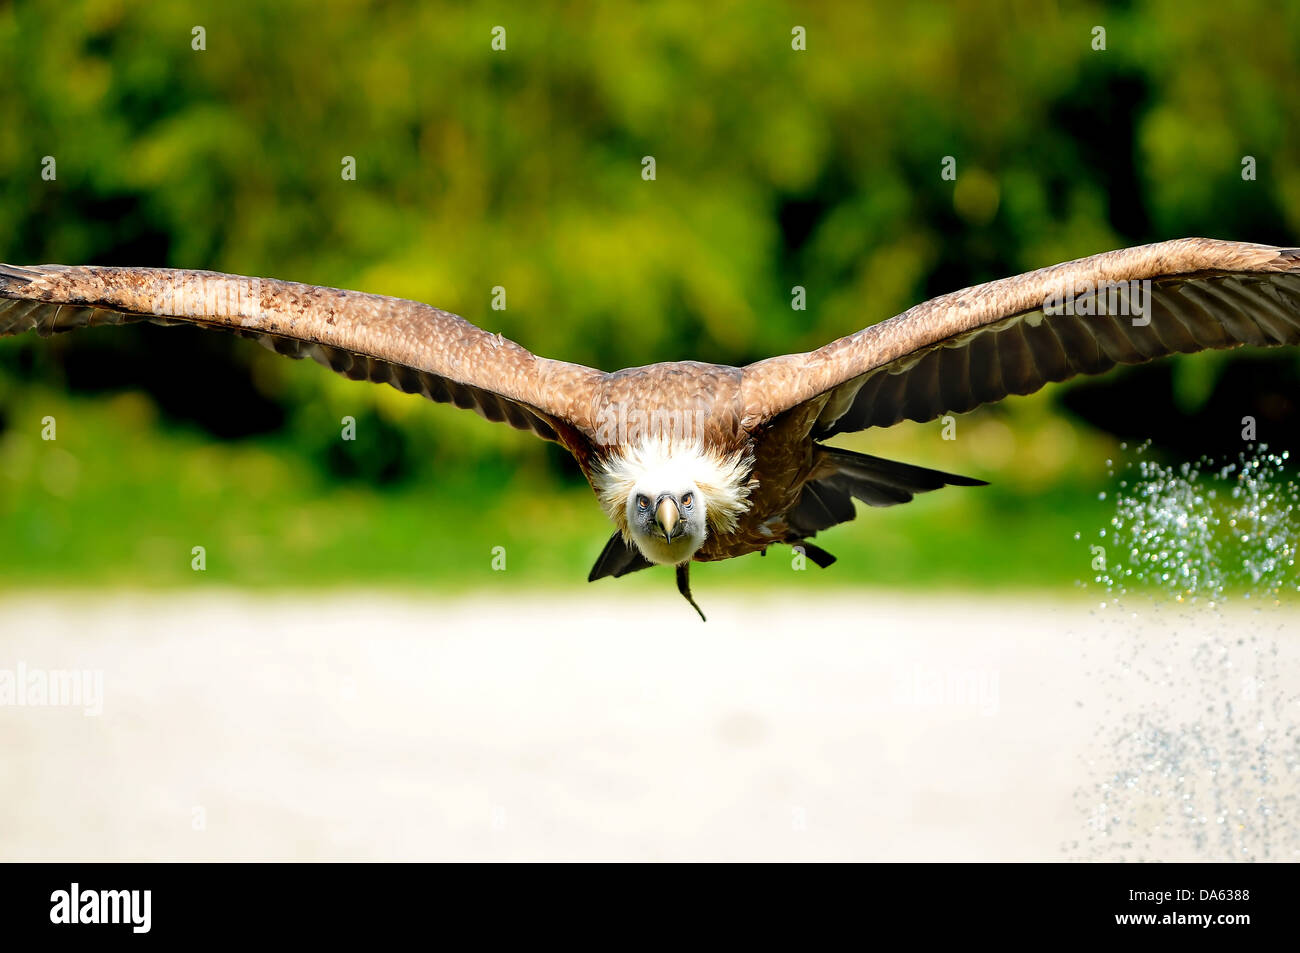 a vulture flying low over water whips up droplets with its enormous wings Stock Photo